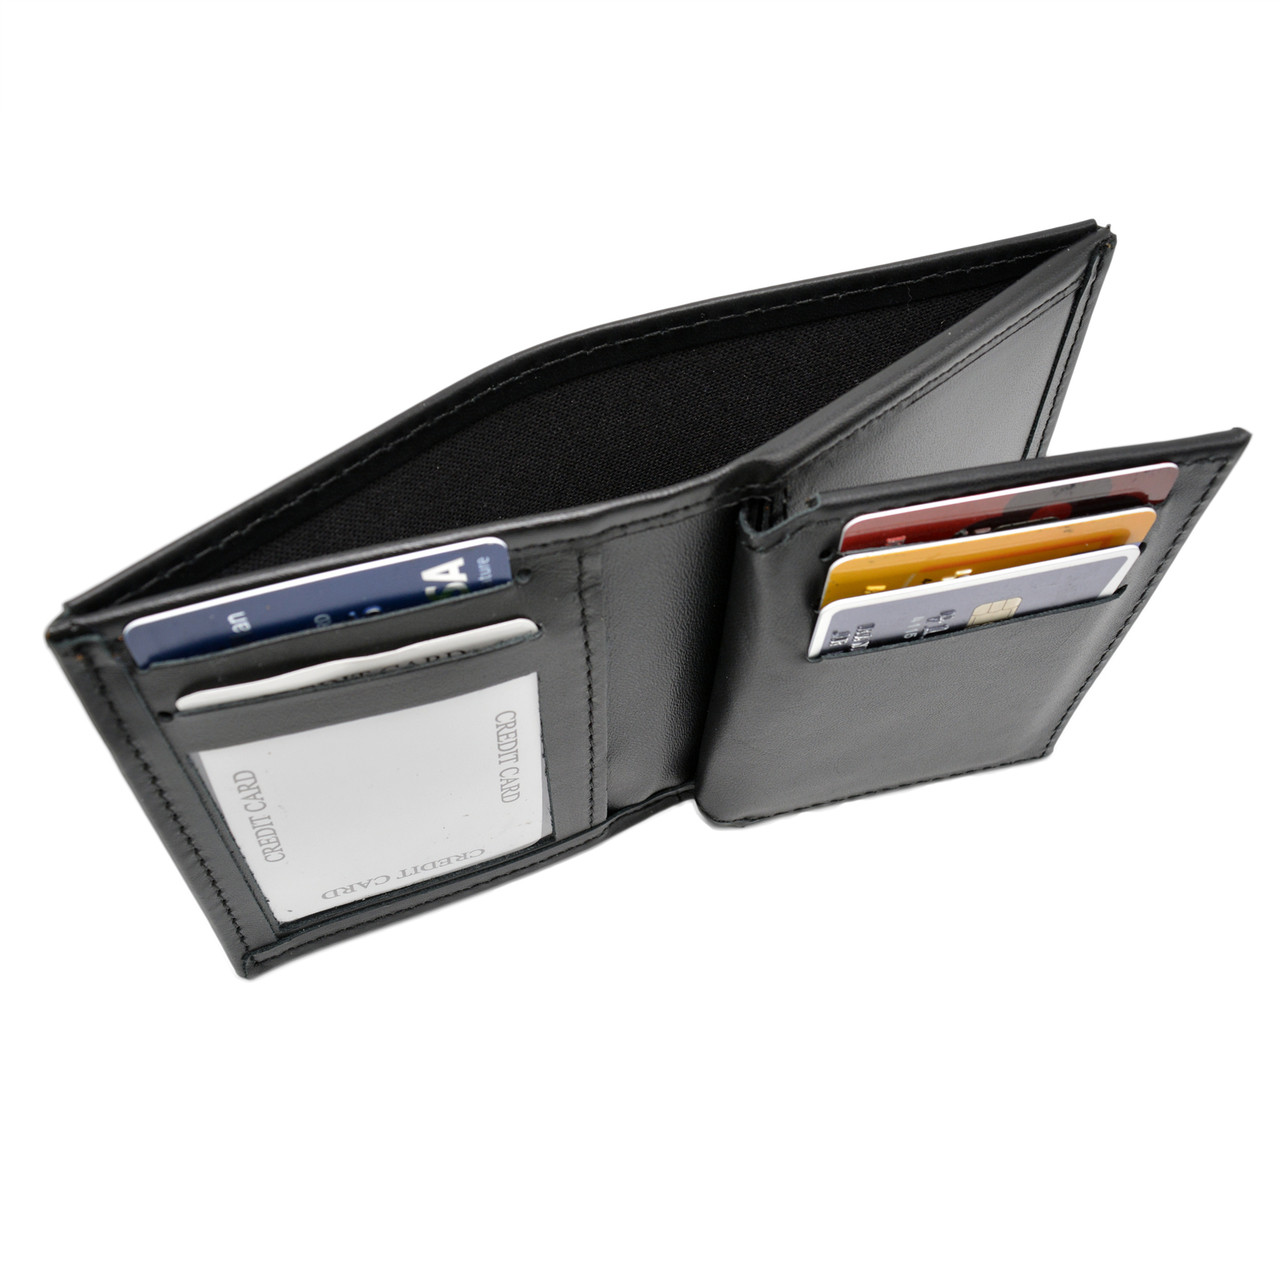 Foam Leather Black Wallet For Men, For Card And Money Safety, 5-7